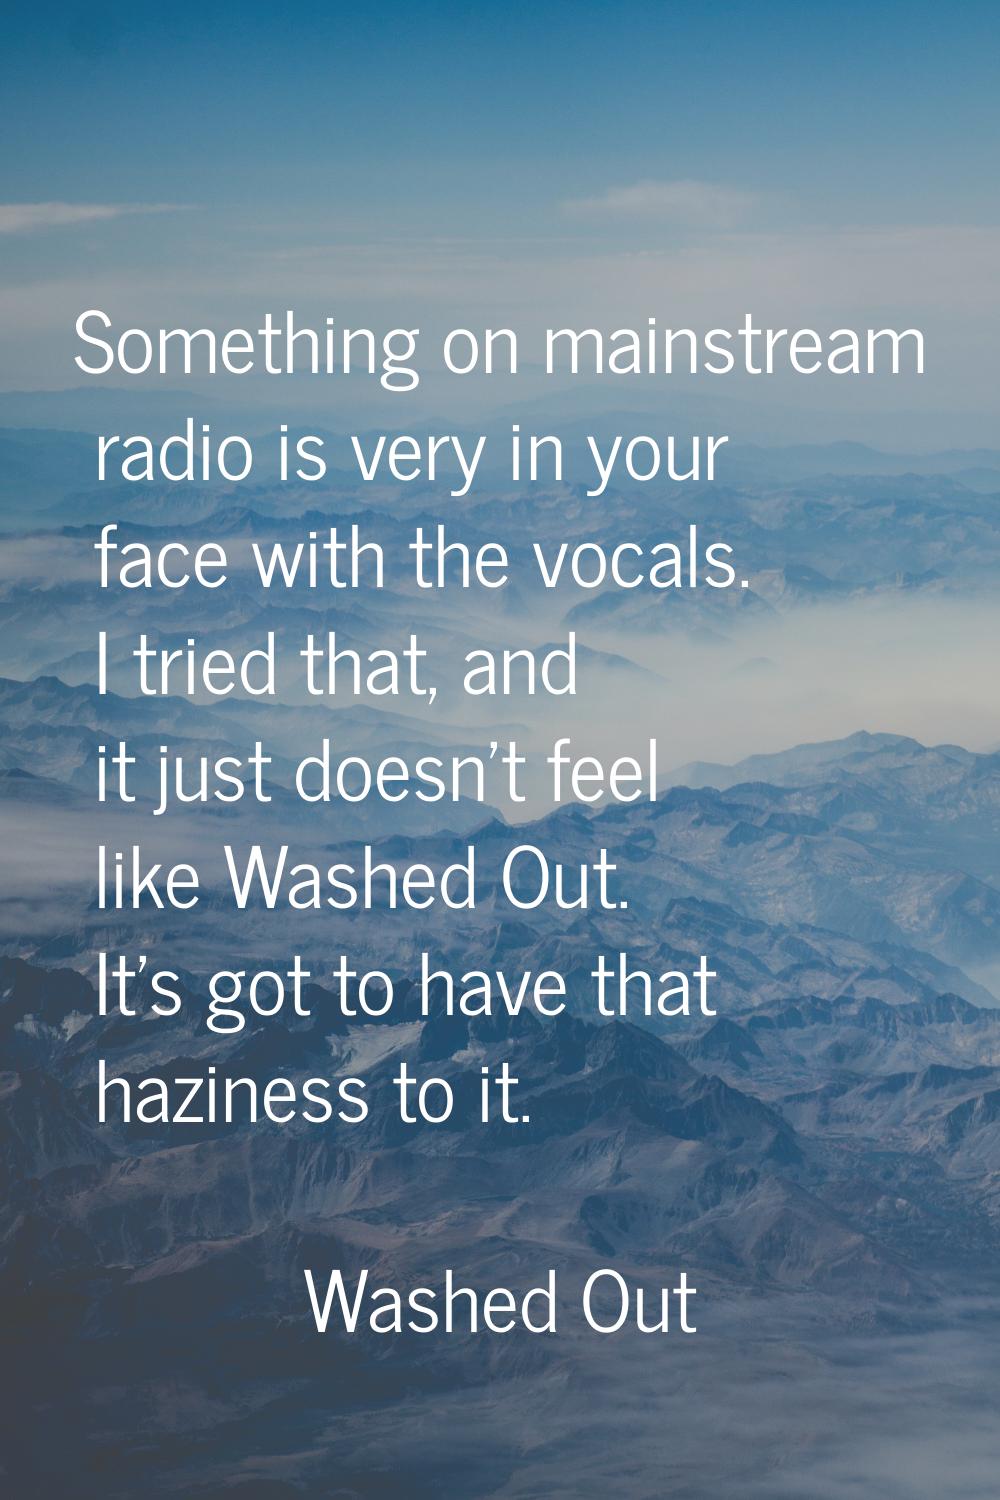 Something on mainstream radio is very in your face with the vocals. I tried that, and it just doesn